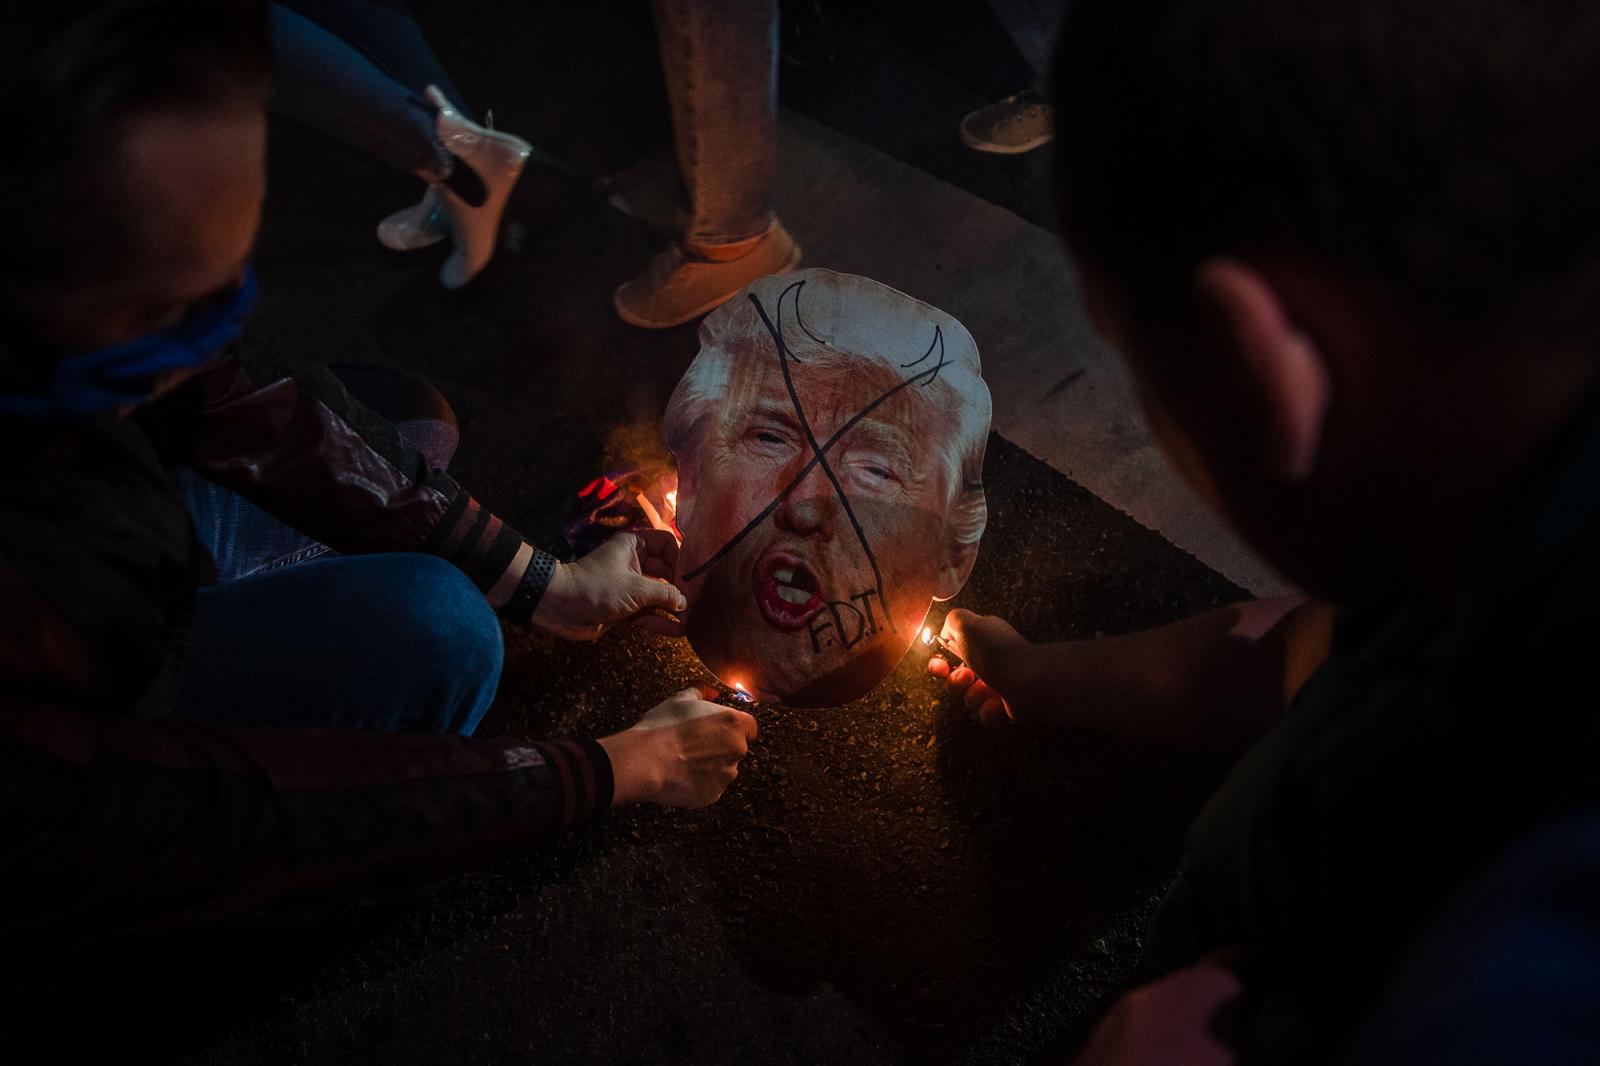 Men set a cardboard cutout on fire of President Donald Trump on November 7, 2020 in San Diego, California. &nbsp;After days of waiting for the election results to be counted, it was announced earlier in the day that Joe Biden defeated President Trump.